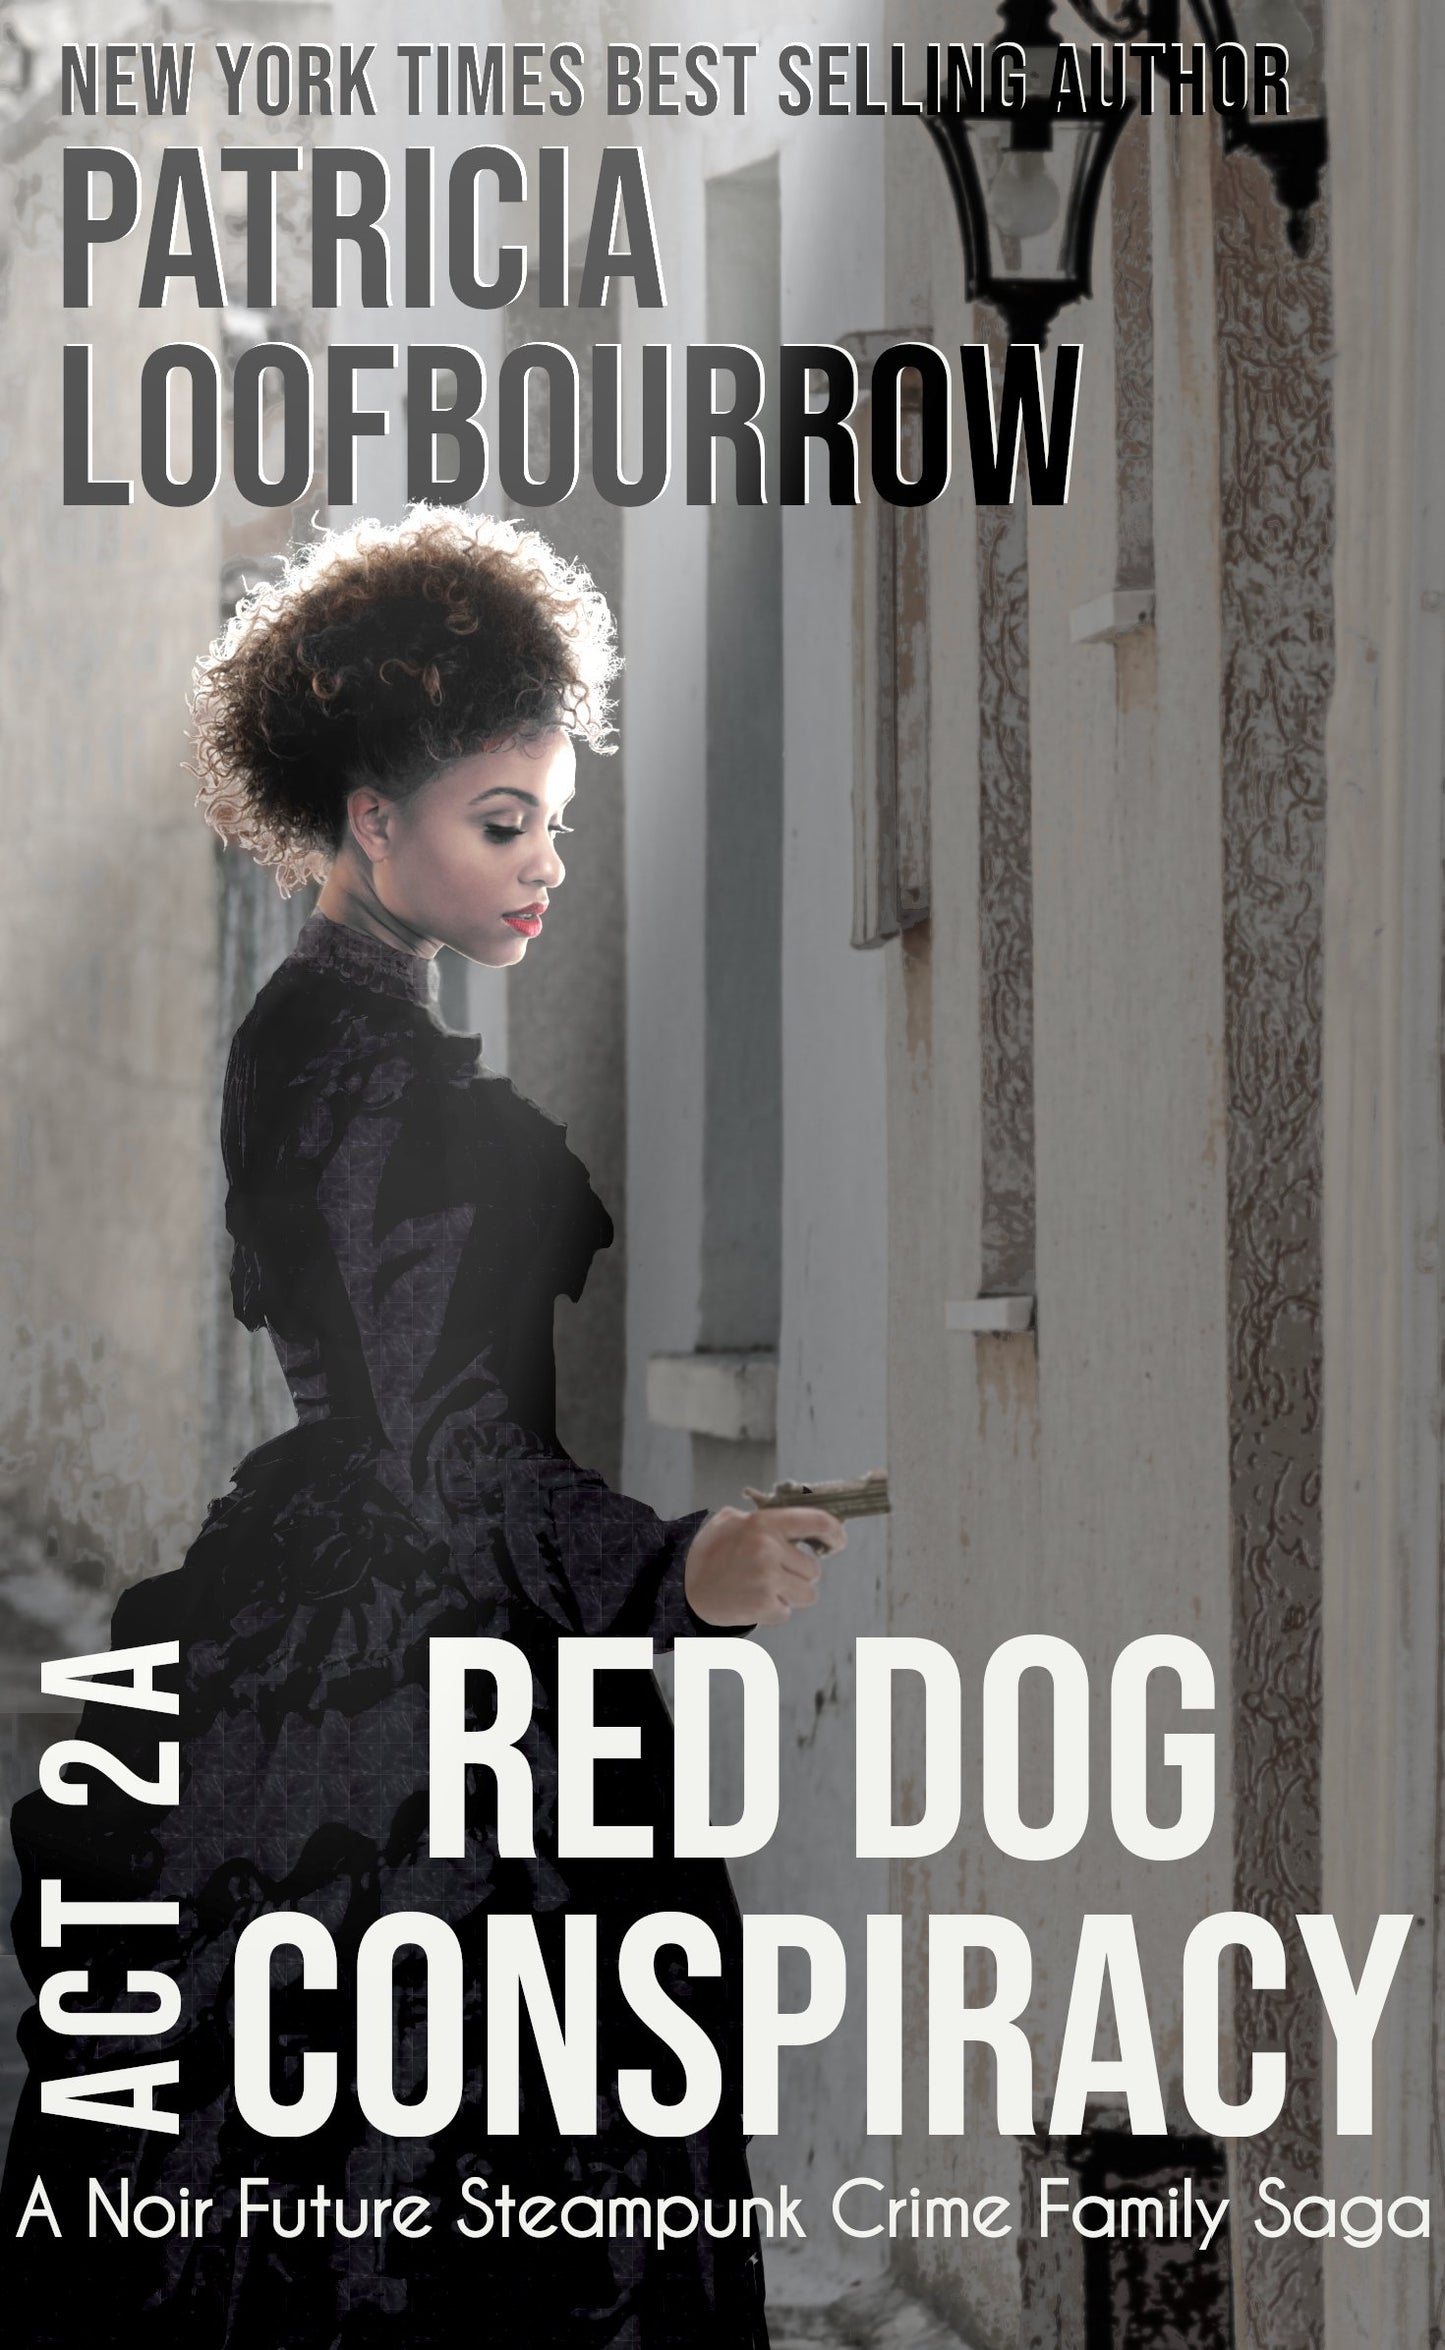 Red Dog Conspiracy Act 2A ebook - Patricia Loofbourrow